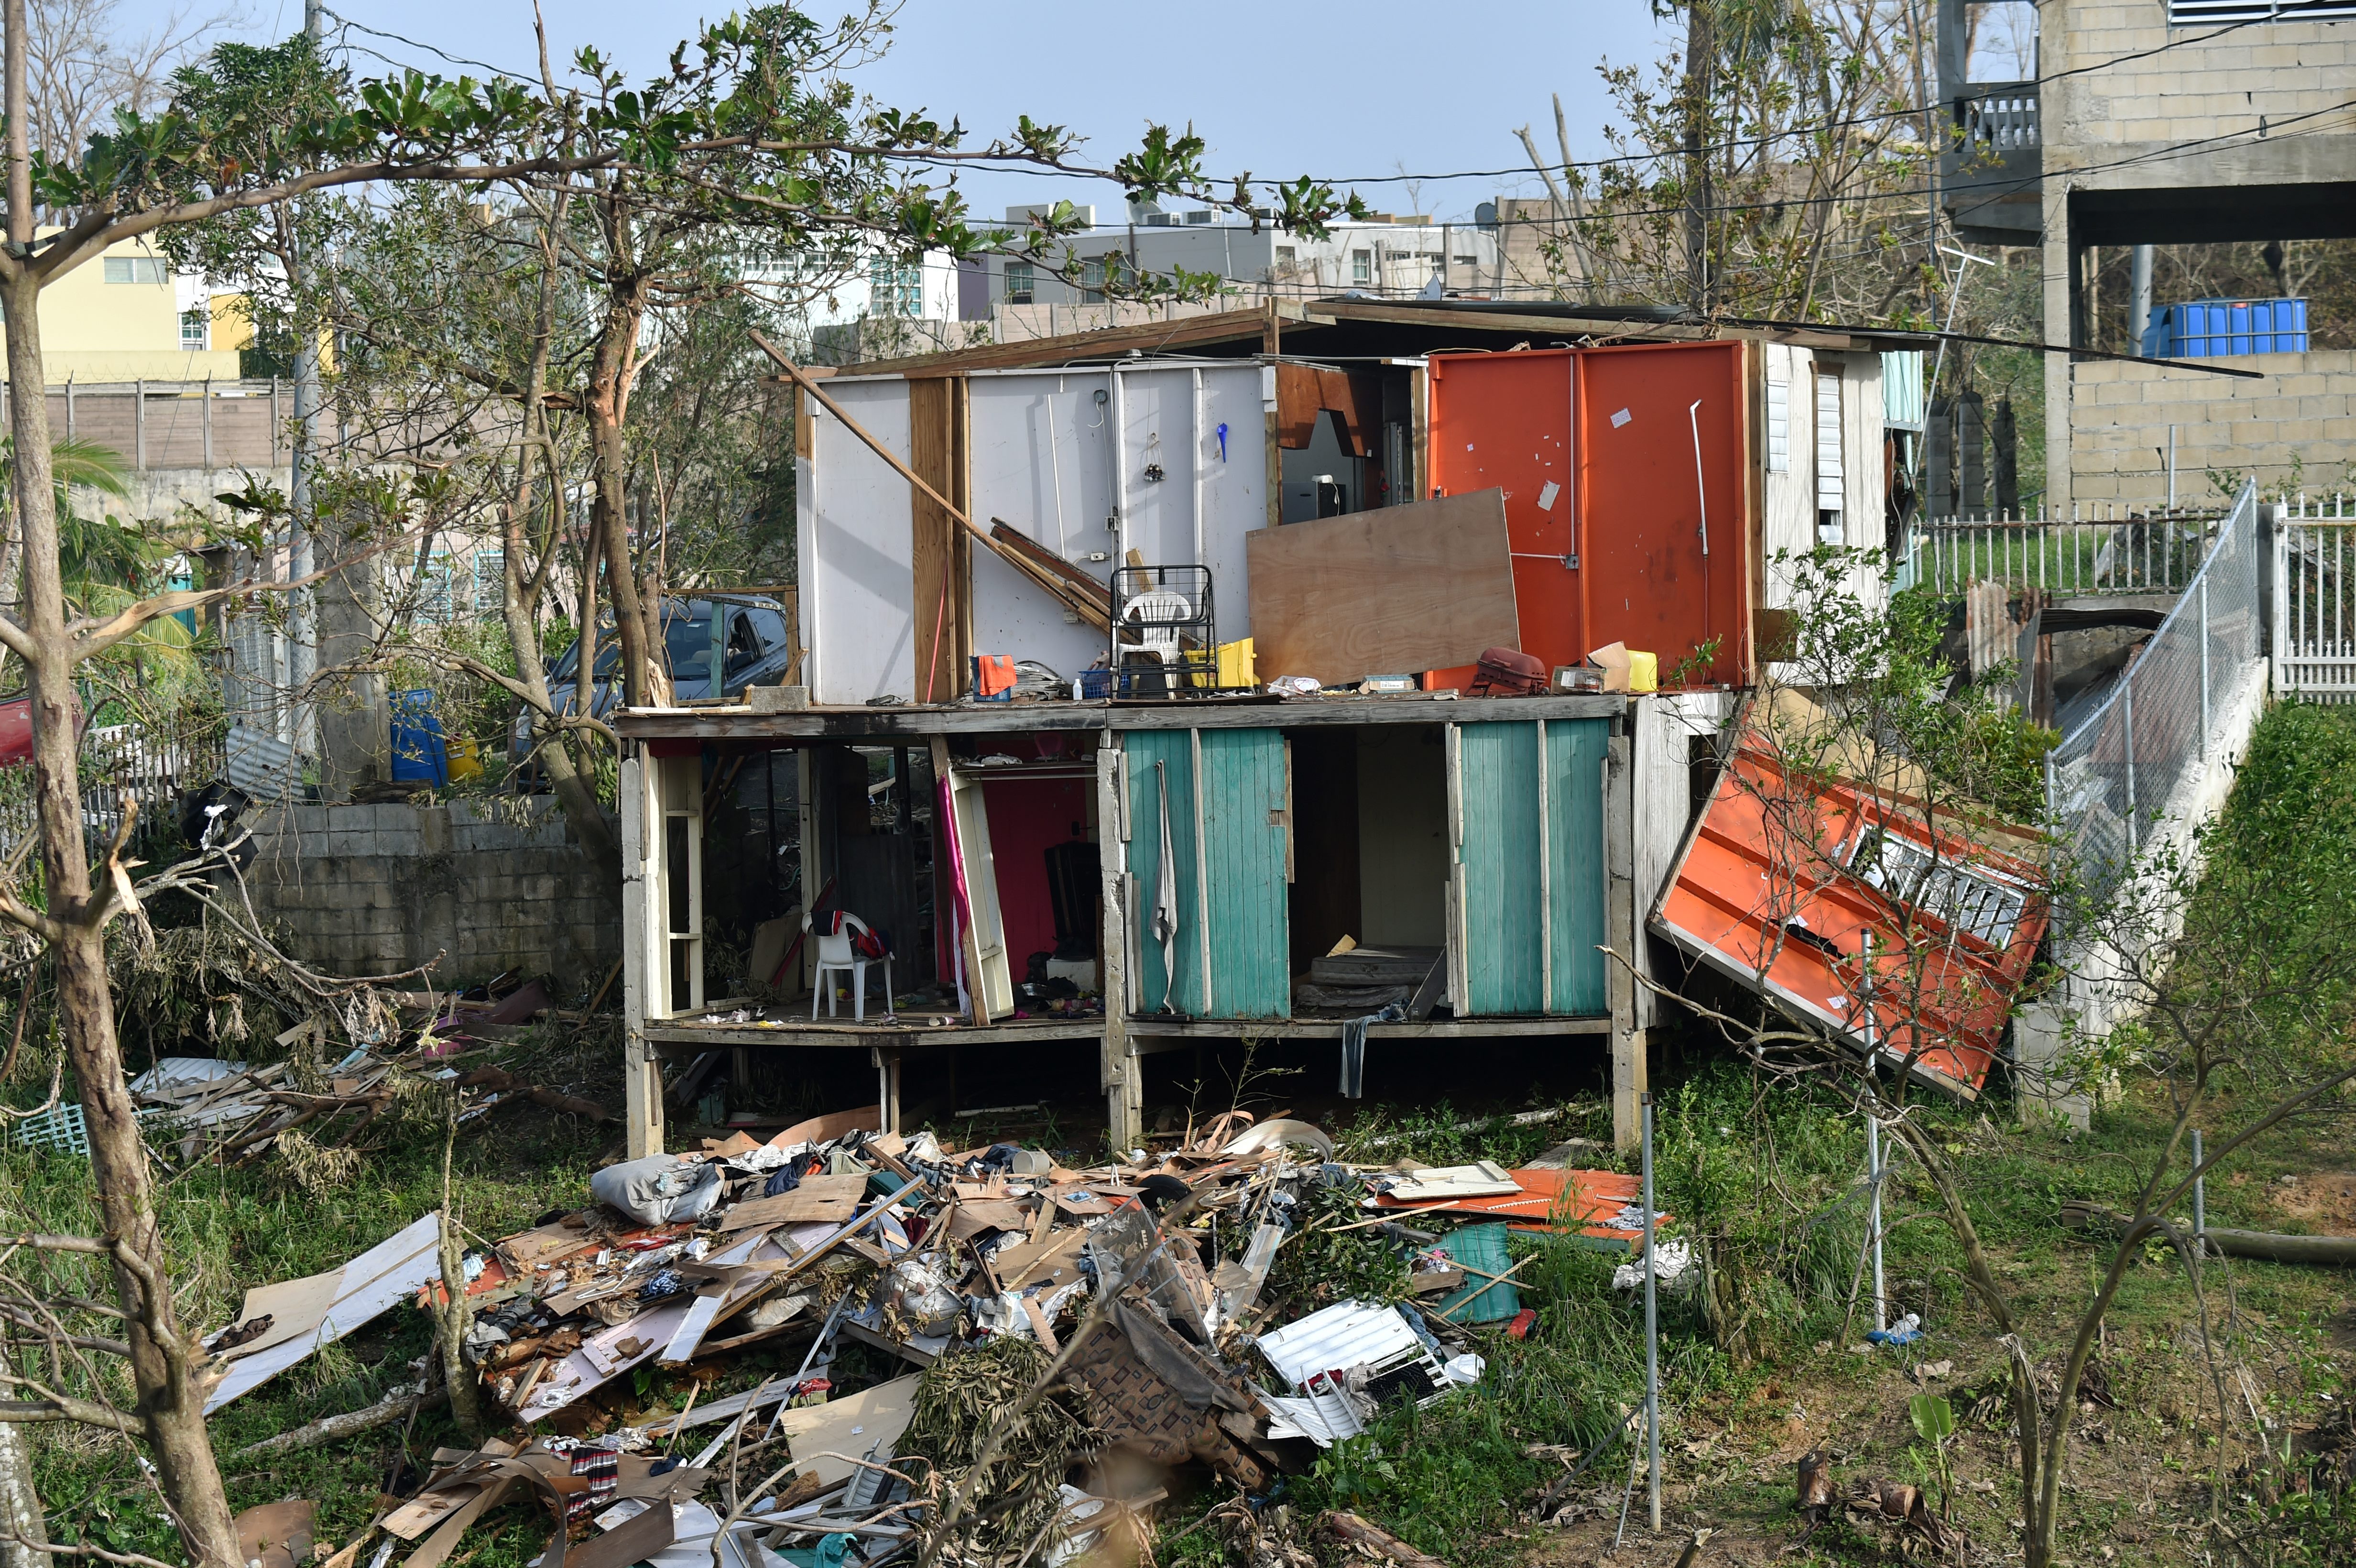 Destroyed homes are seen following passage of Hurricane Maria in the neigborhood of Acerolas in Toa Alto, Puerto Rico, on September 26, 2017. The US island territory, working without electricity, is struggling to dig out and clean up from its disastrous brush with the hurricane, blamed for at least 33 deaths across the Caribbean. / AFP PHOTO / HECTOR RETAMAL (Photo credit should read HECTOR RETAMAL/AFP/Getty Images)